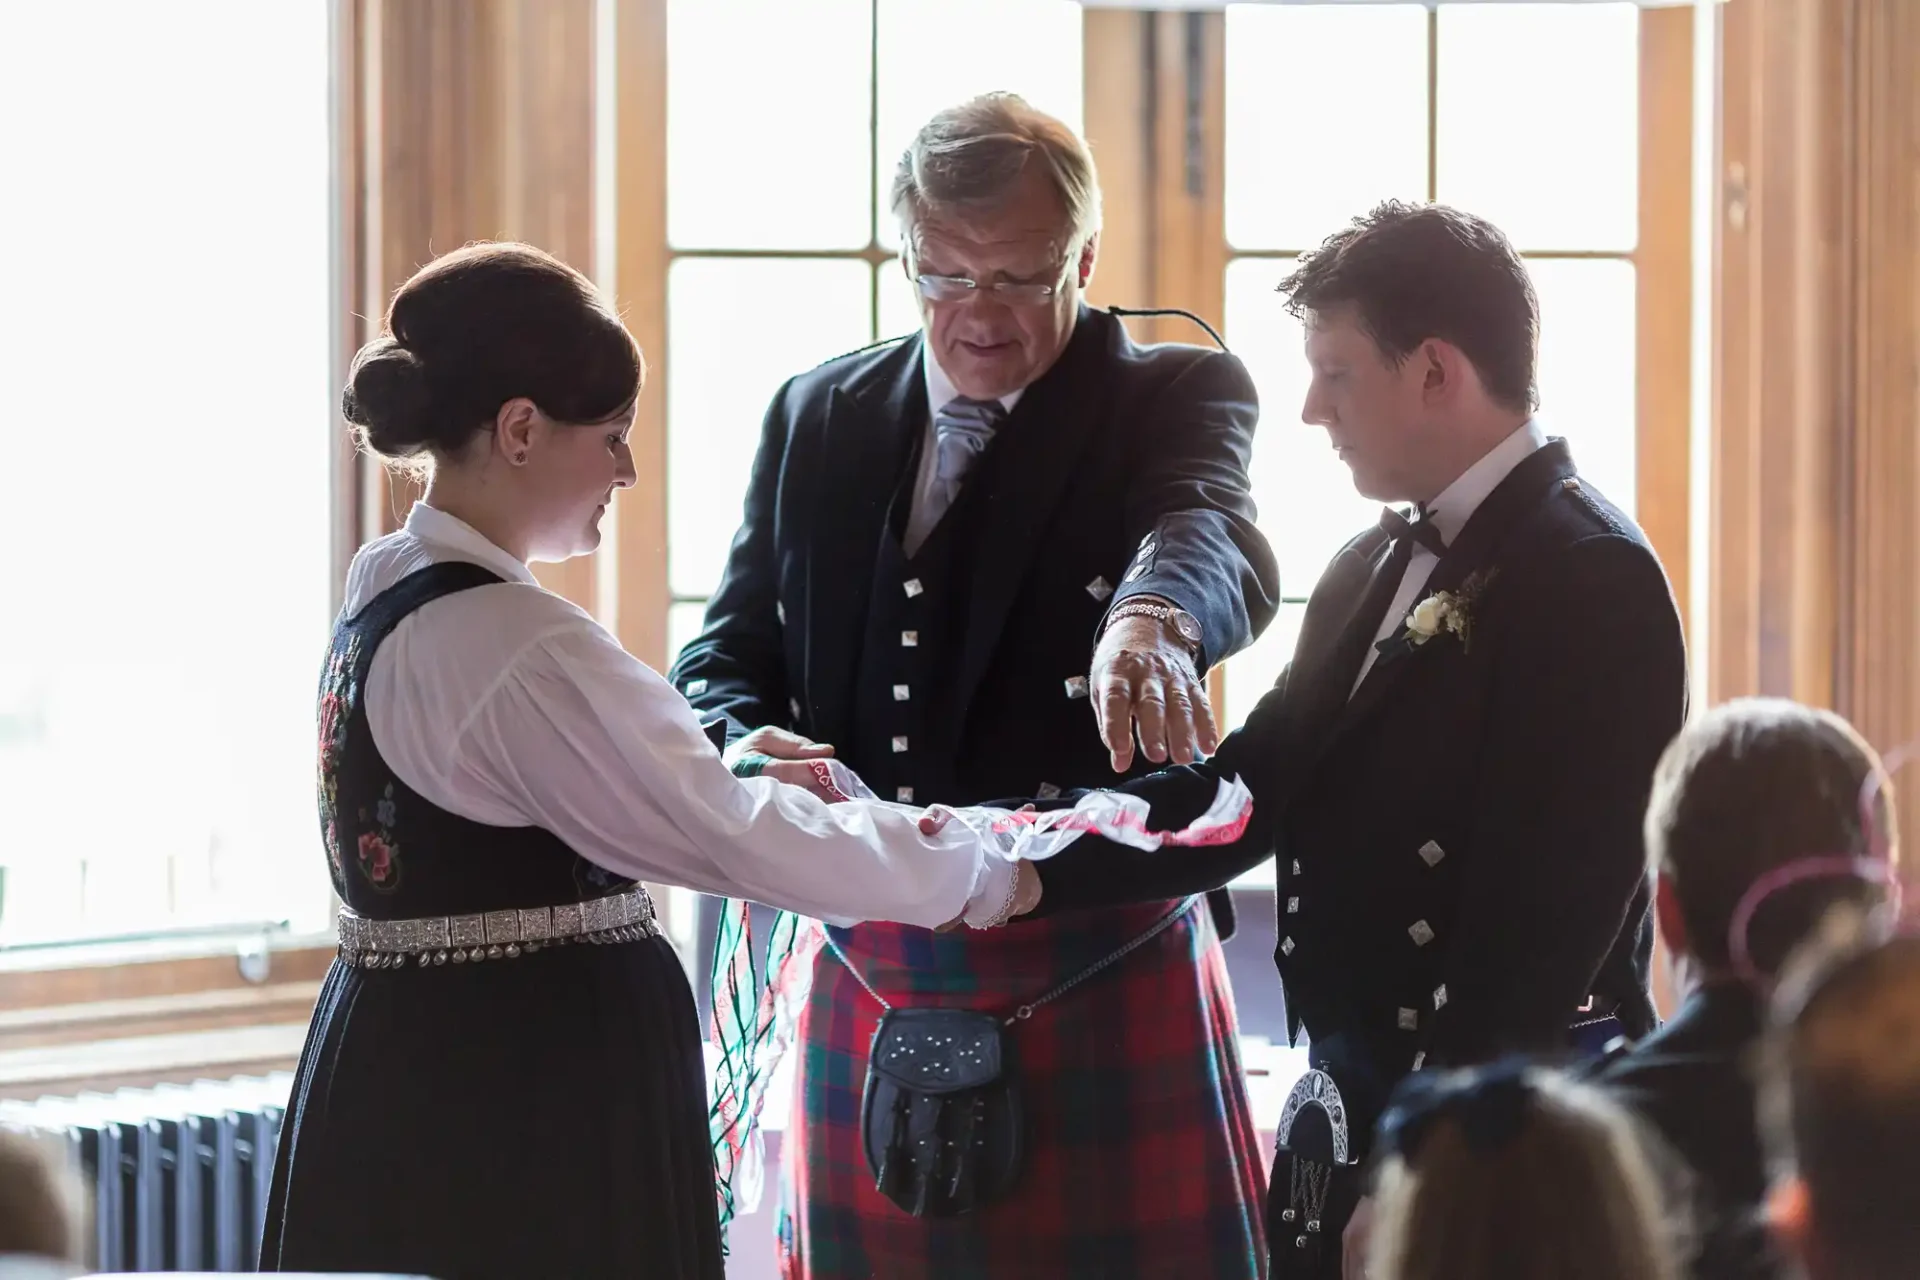 A wedding officiant conducts a handfasting ceremony for a bride and groom dressed in traditional scottish attire.